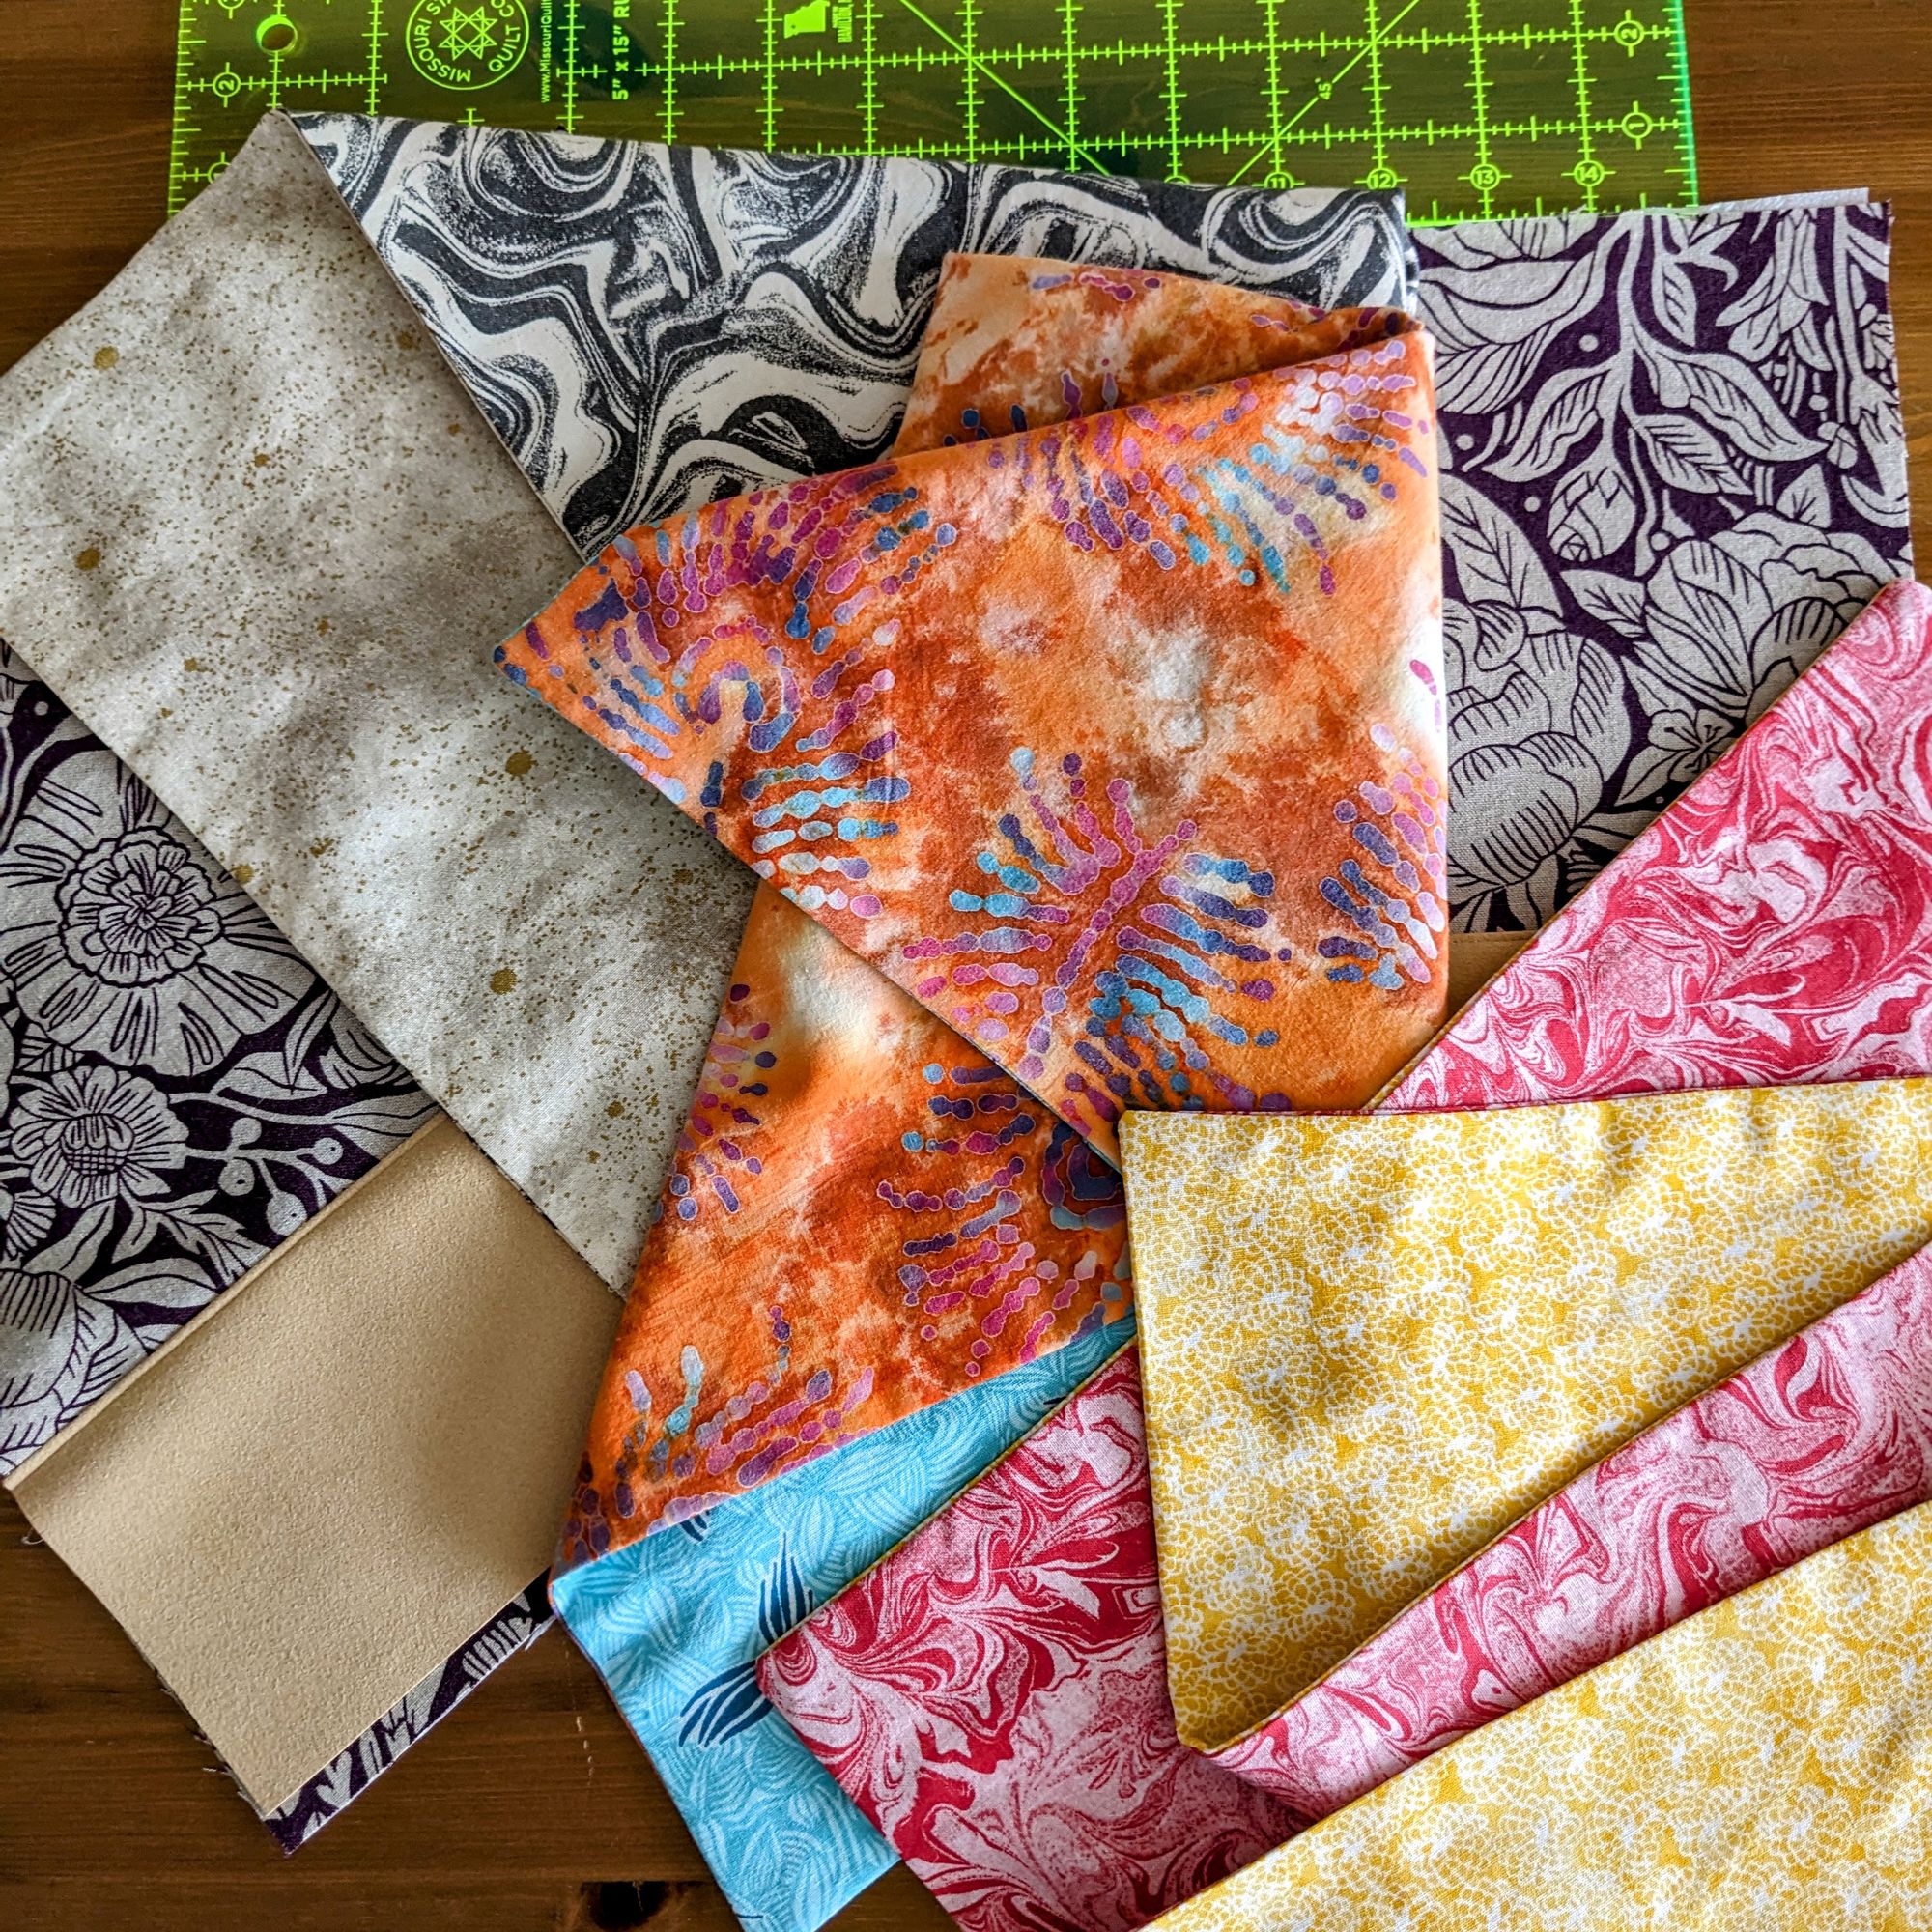 Colourful cotton dinner napkins on a wooden background with a quilting rule above.